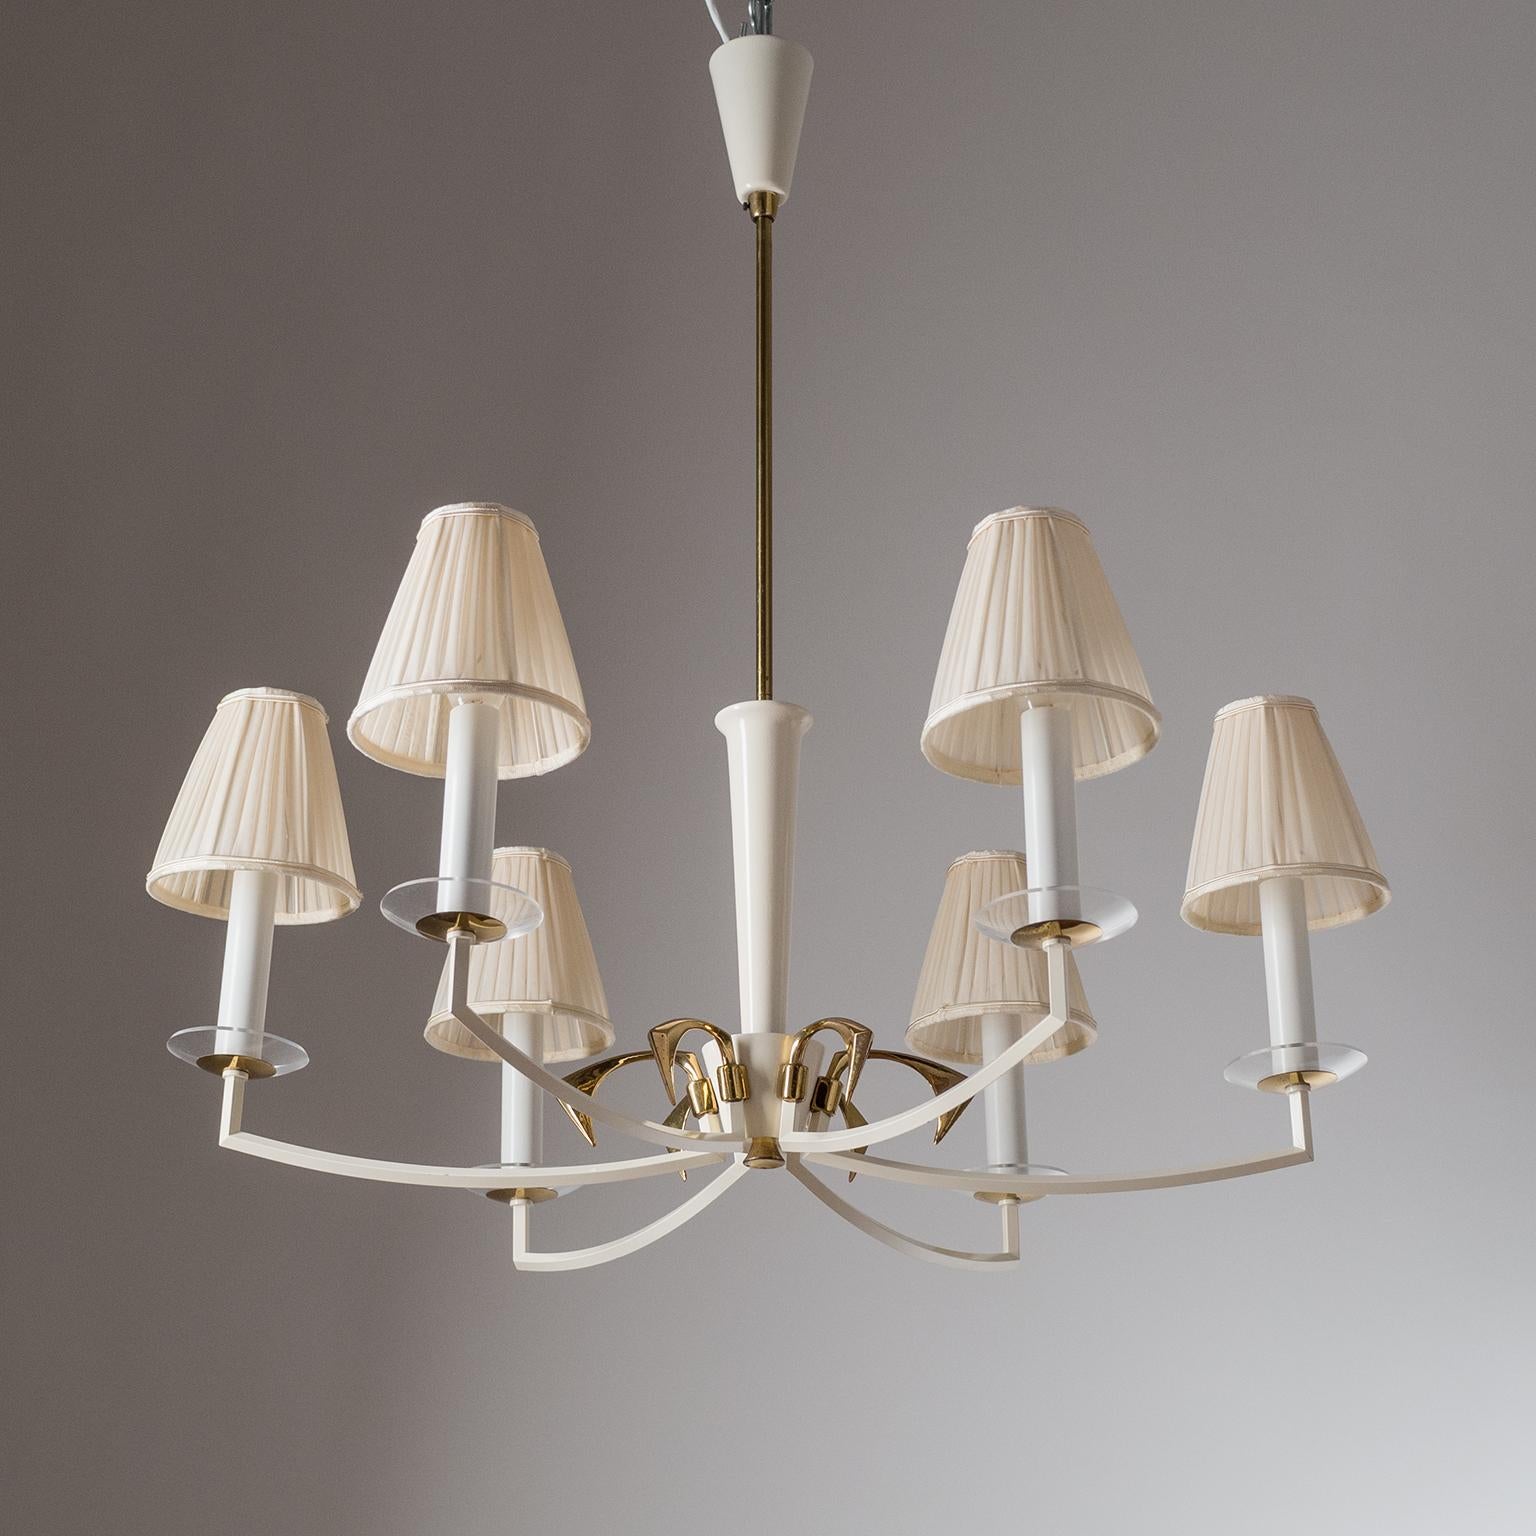 Rare brass chandelier by Vereinigte Werkstätten, circa 1960. The six brass arms have a rare angular shape and are enameled in off-white, as are the canopy and the wooden centerpiece on the stem. Very good original condition with minor patina and new